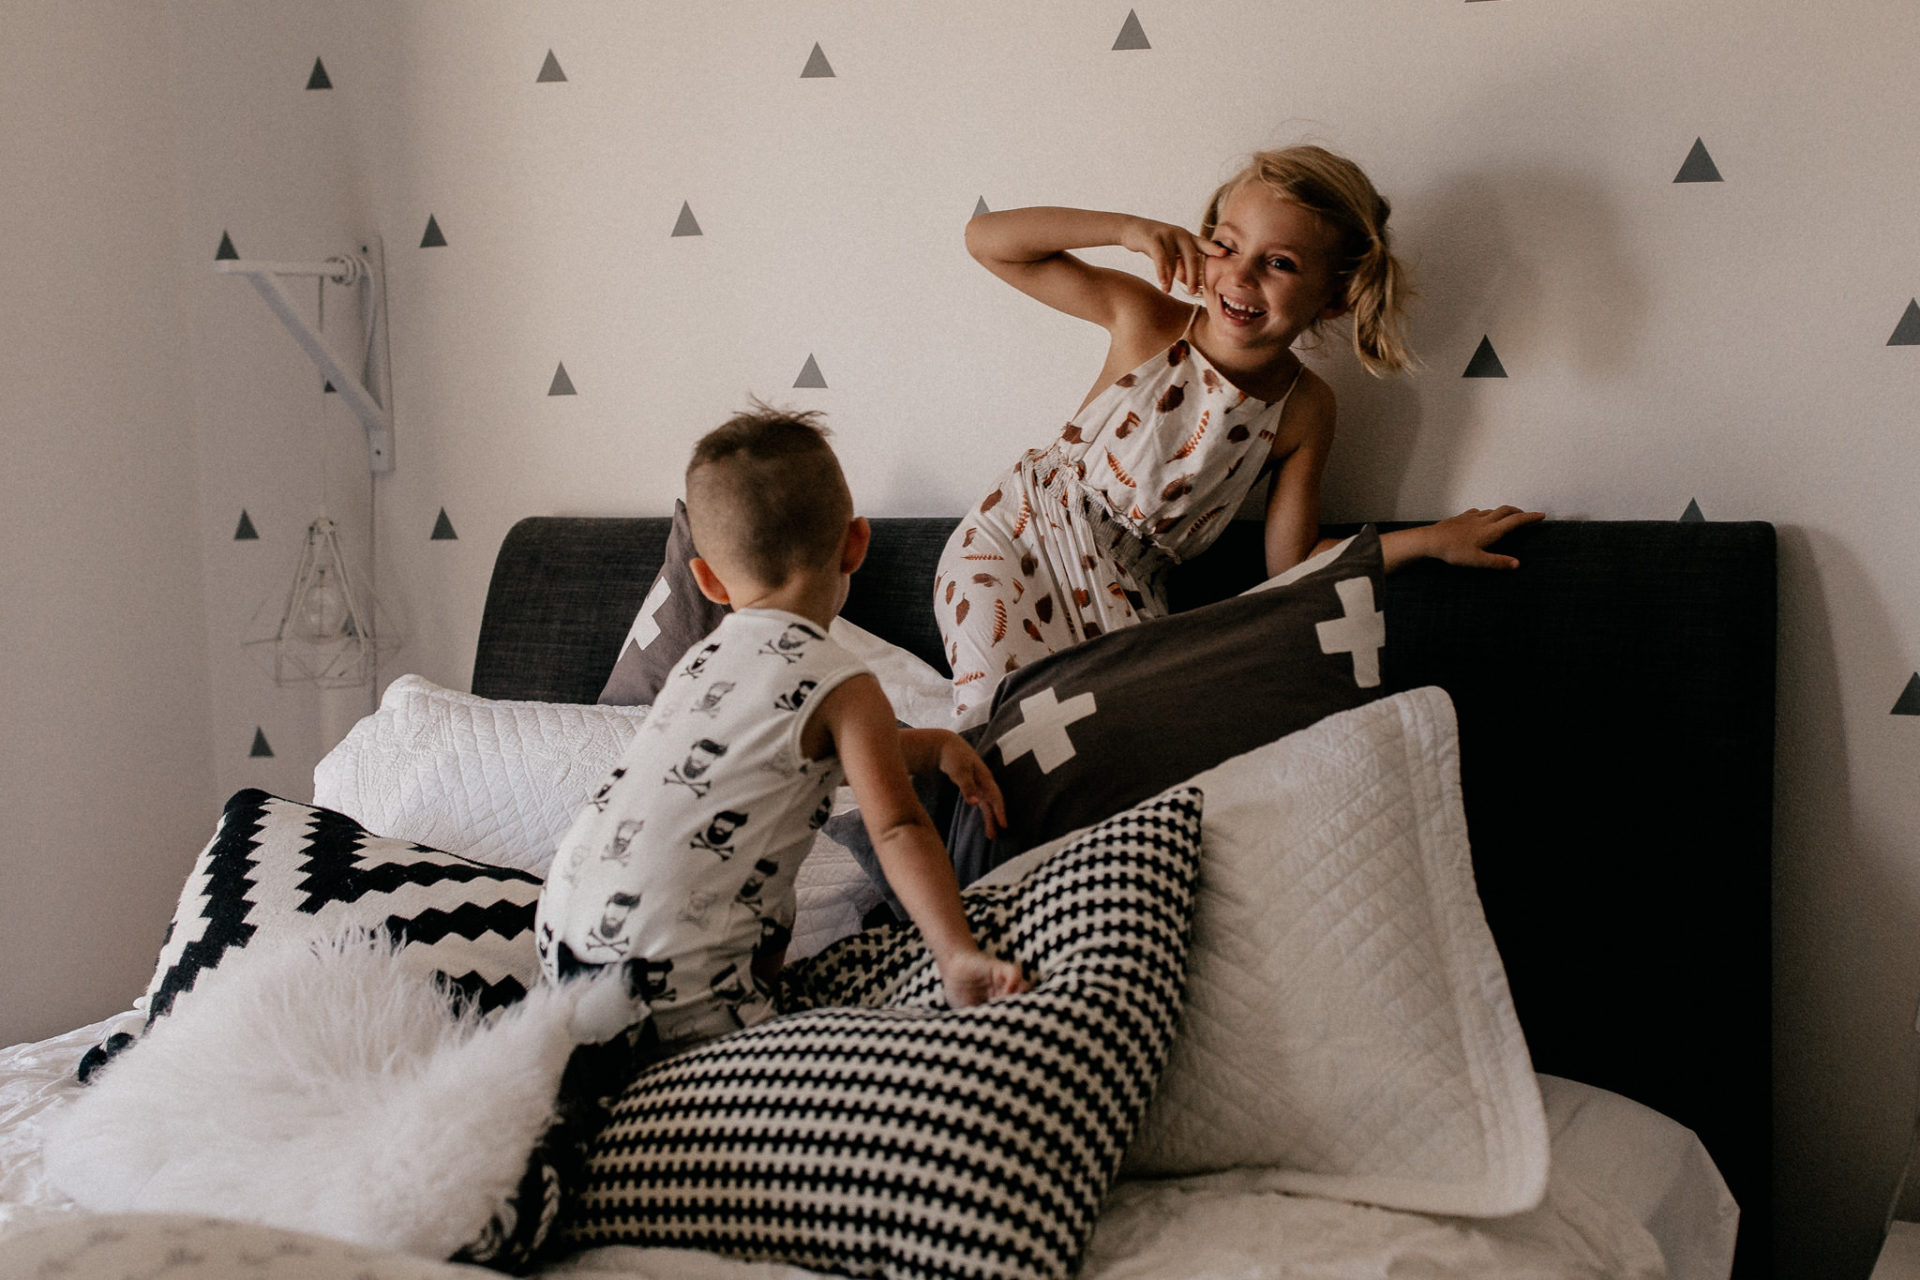 Sydney family photographer-homestory with kids-quirky documentary unposed wedding photography-melbourne family photography-candid moments-hip kids apparel